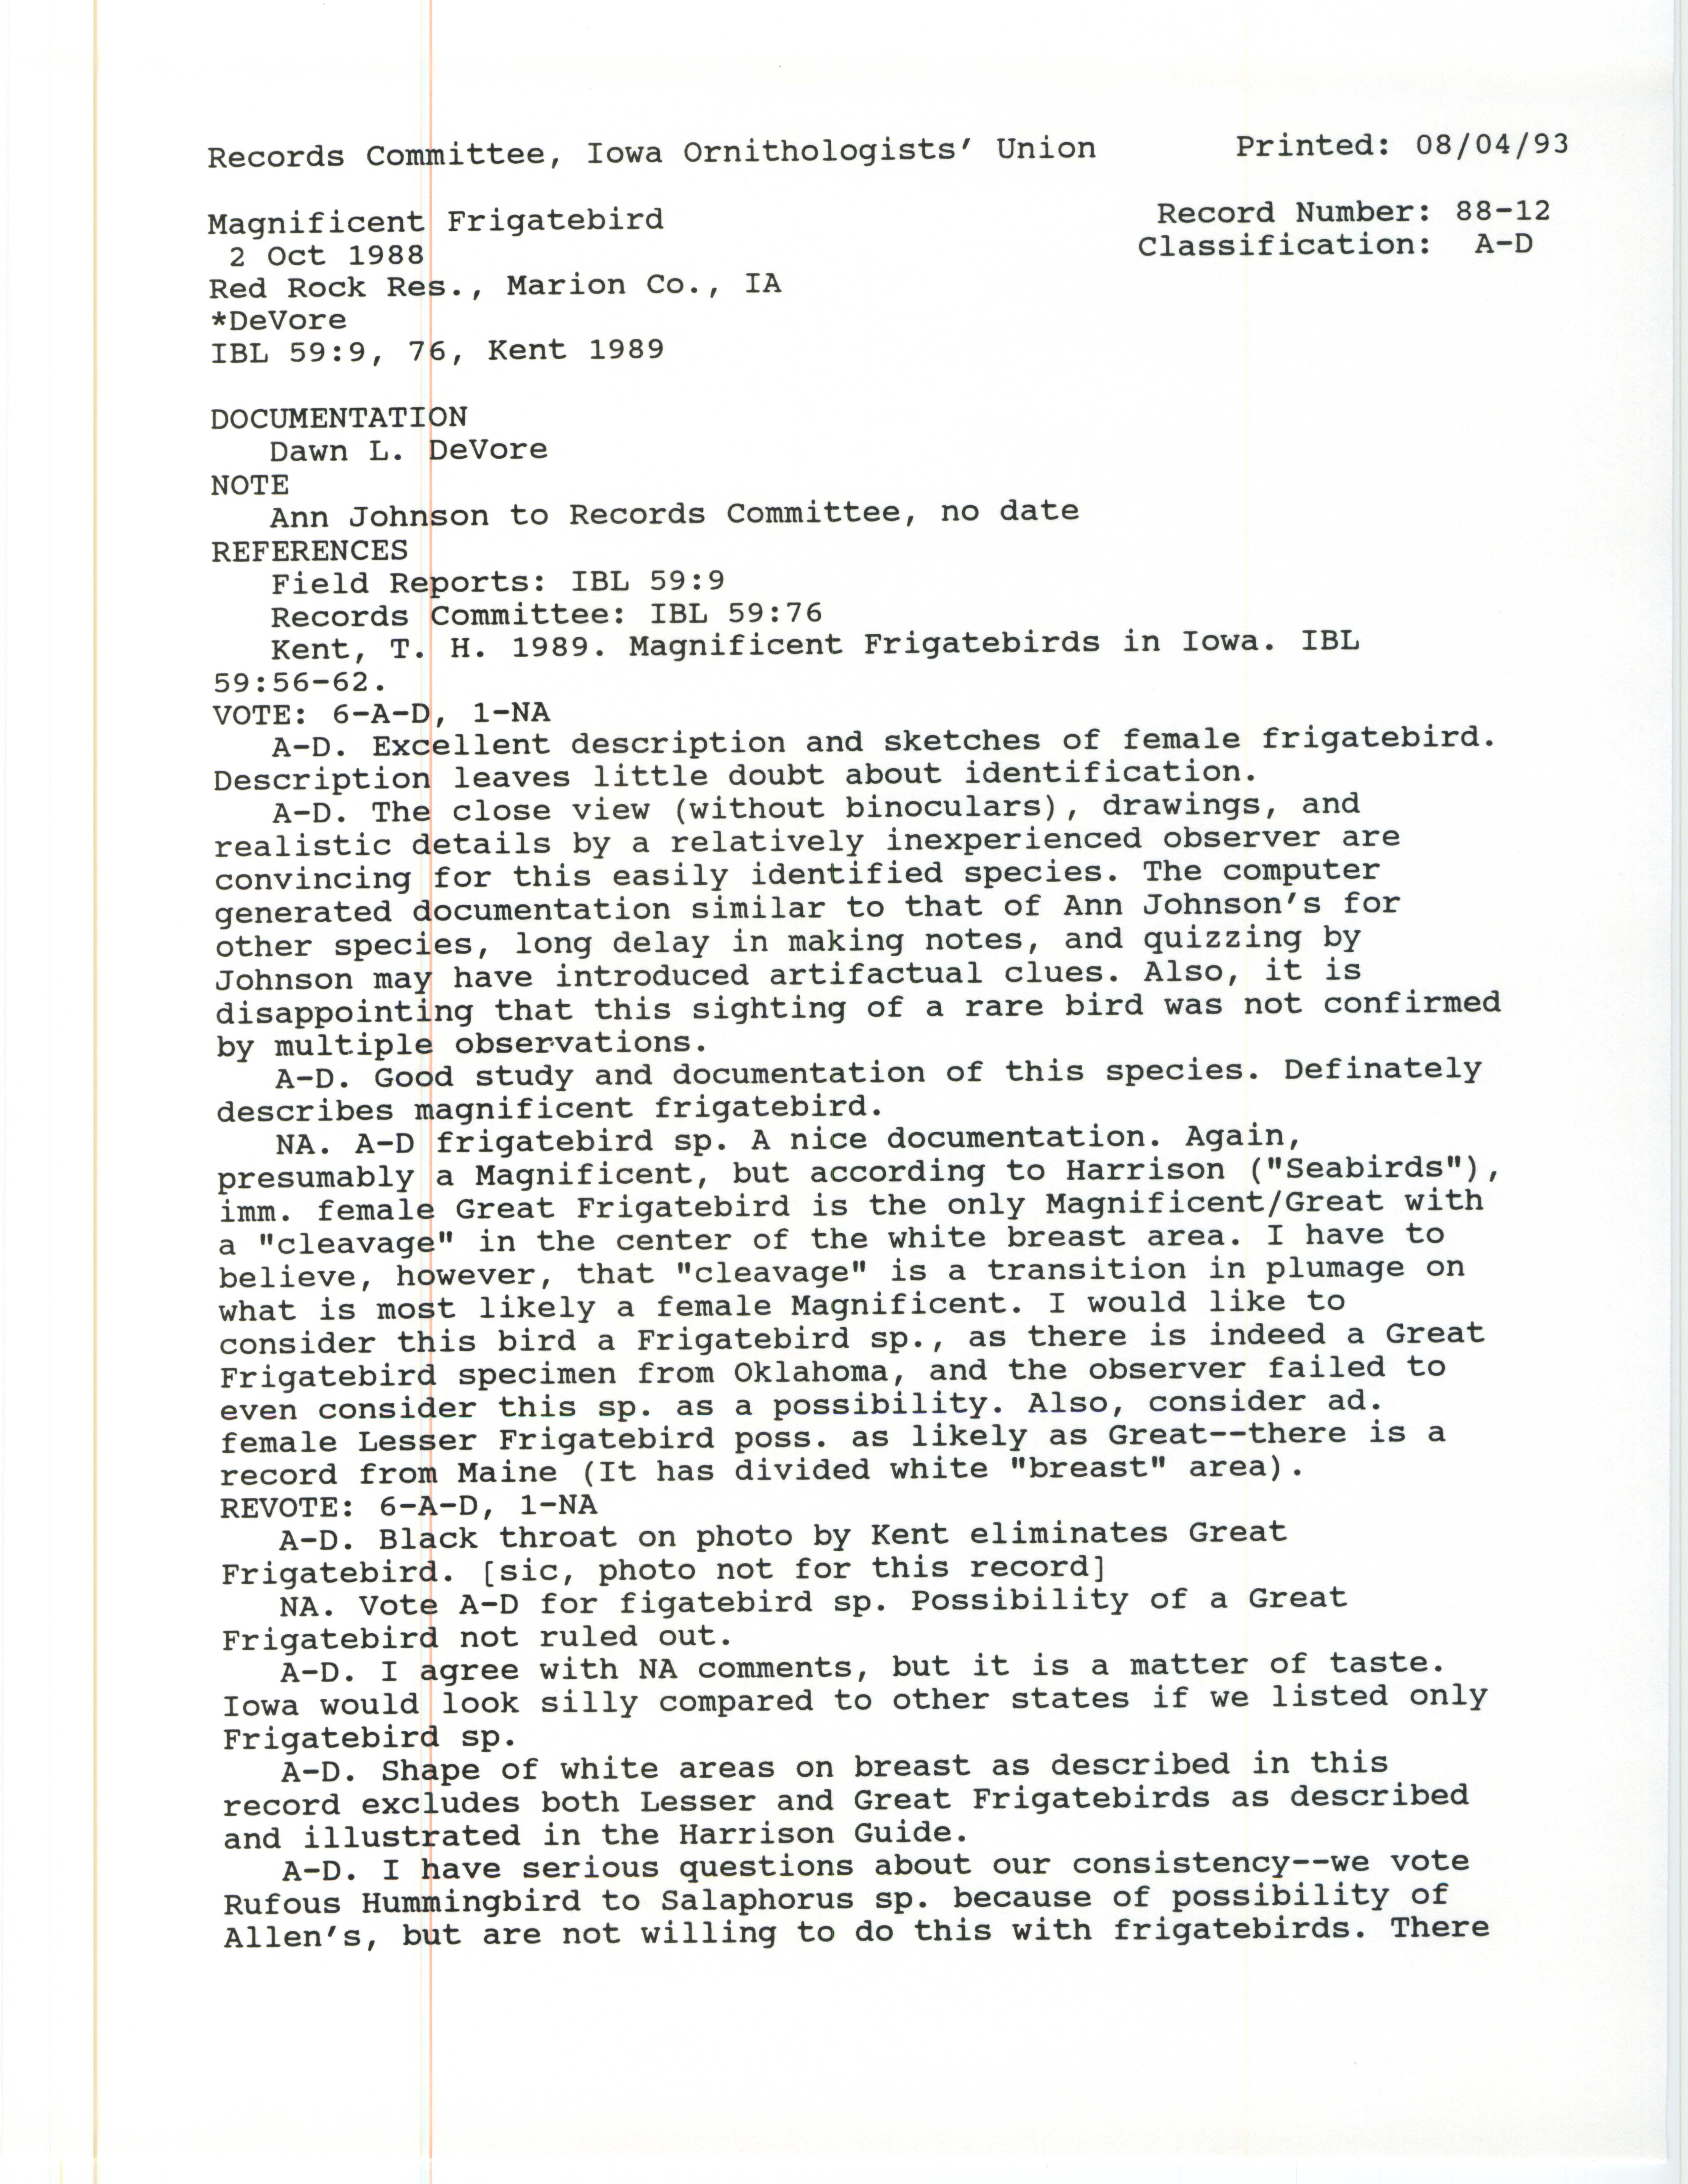 Records Committee review for rare bird sighting of Magnificent Frigatebird at Red Rock Reservoir, 1988